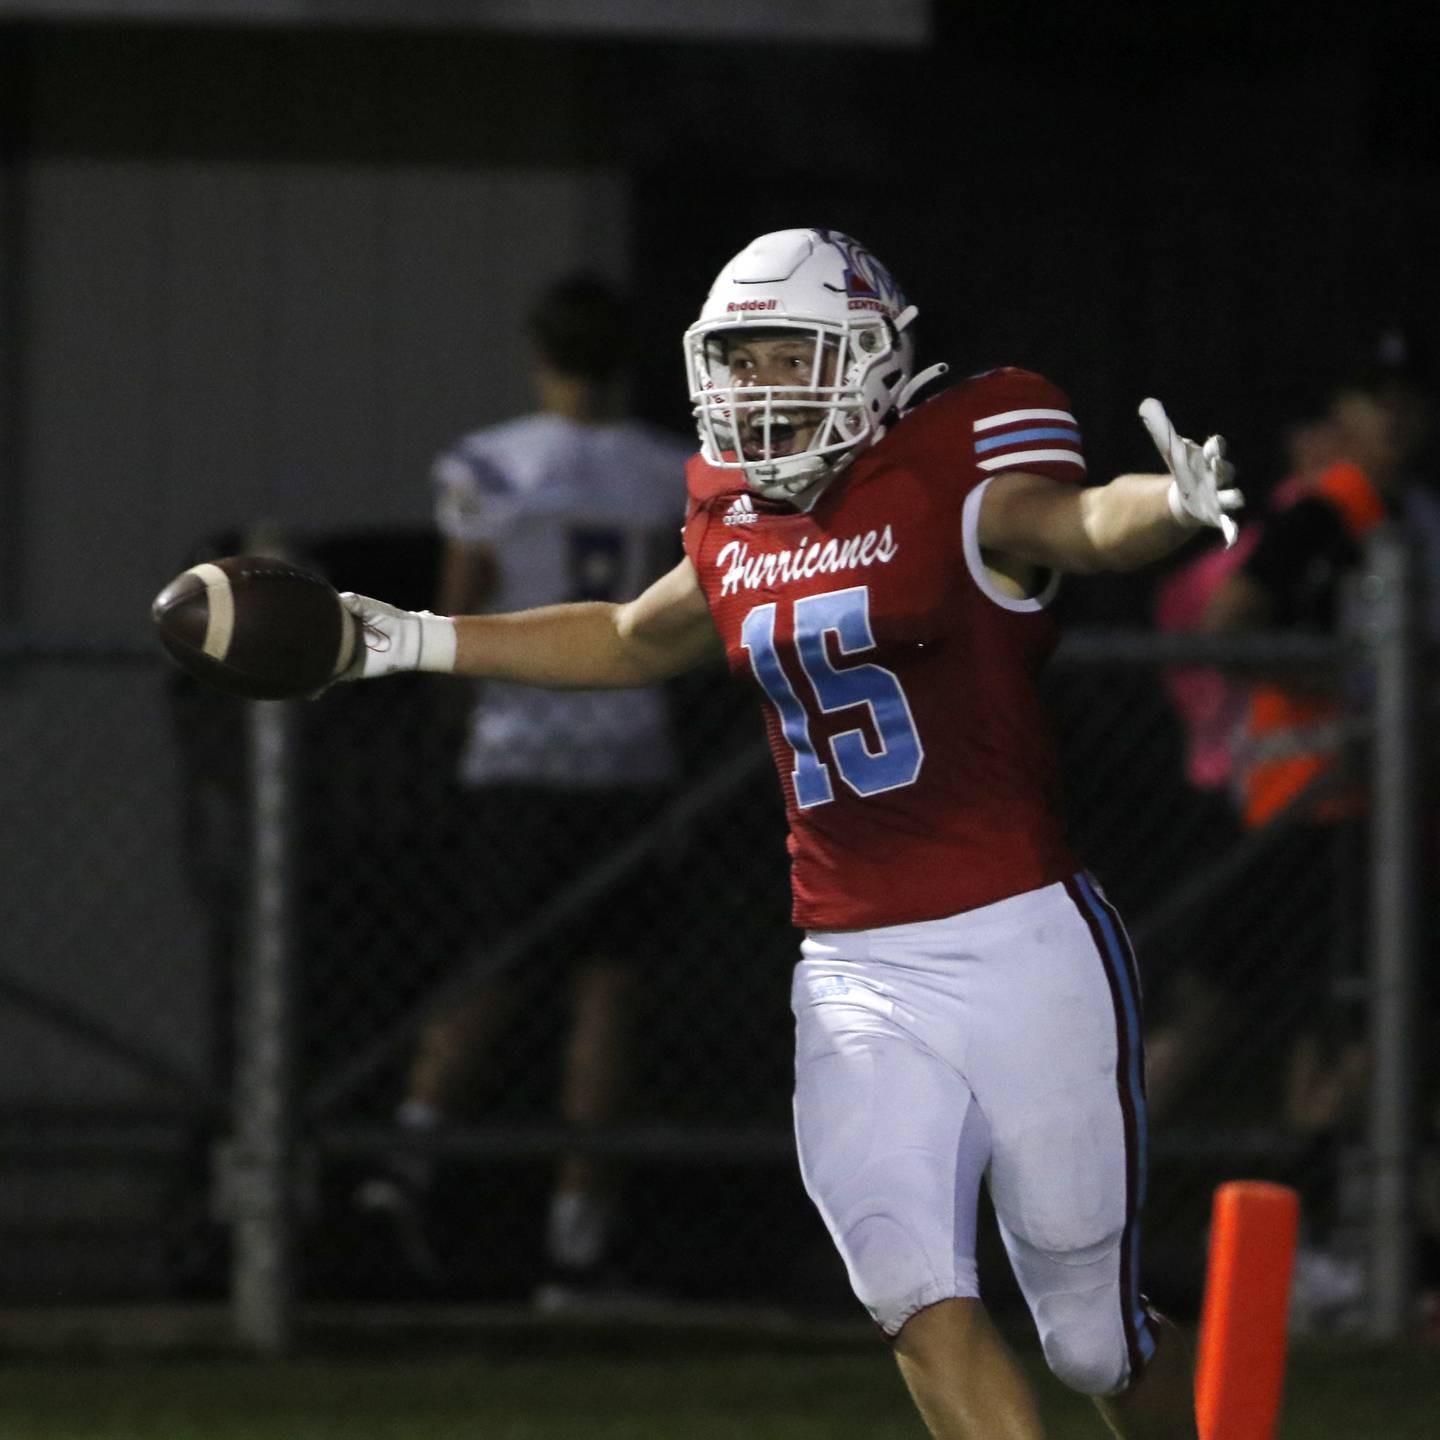 Marian Central's Rylan Dolter celebrates a touchdown during a non-conference football game Friday, Sept. 2, 2022, between Marian Central and Johnsburg at Marian Central High School.